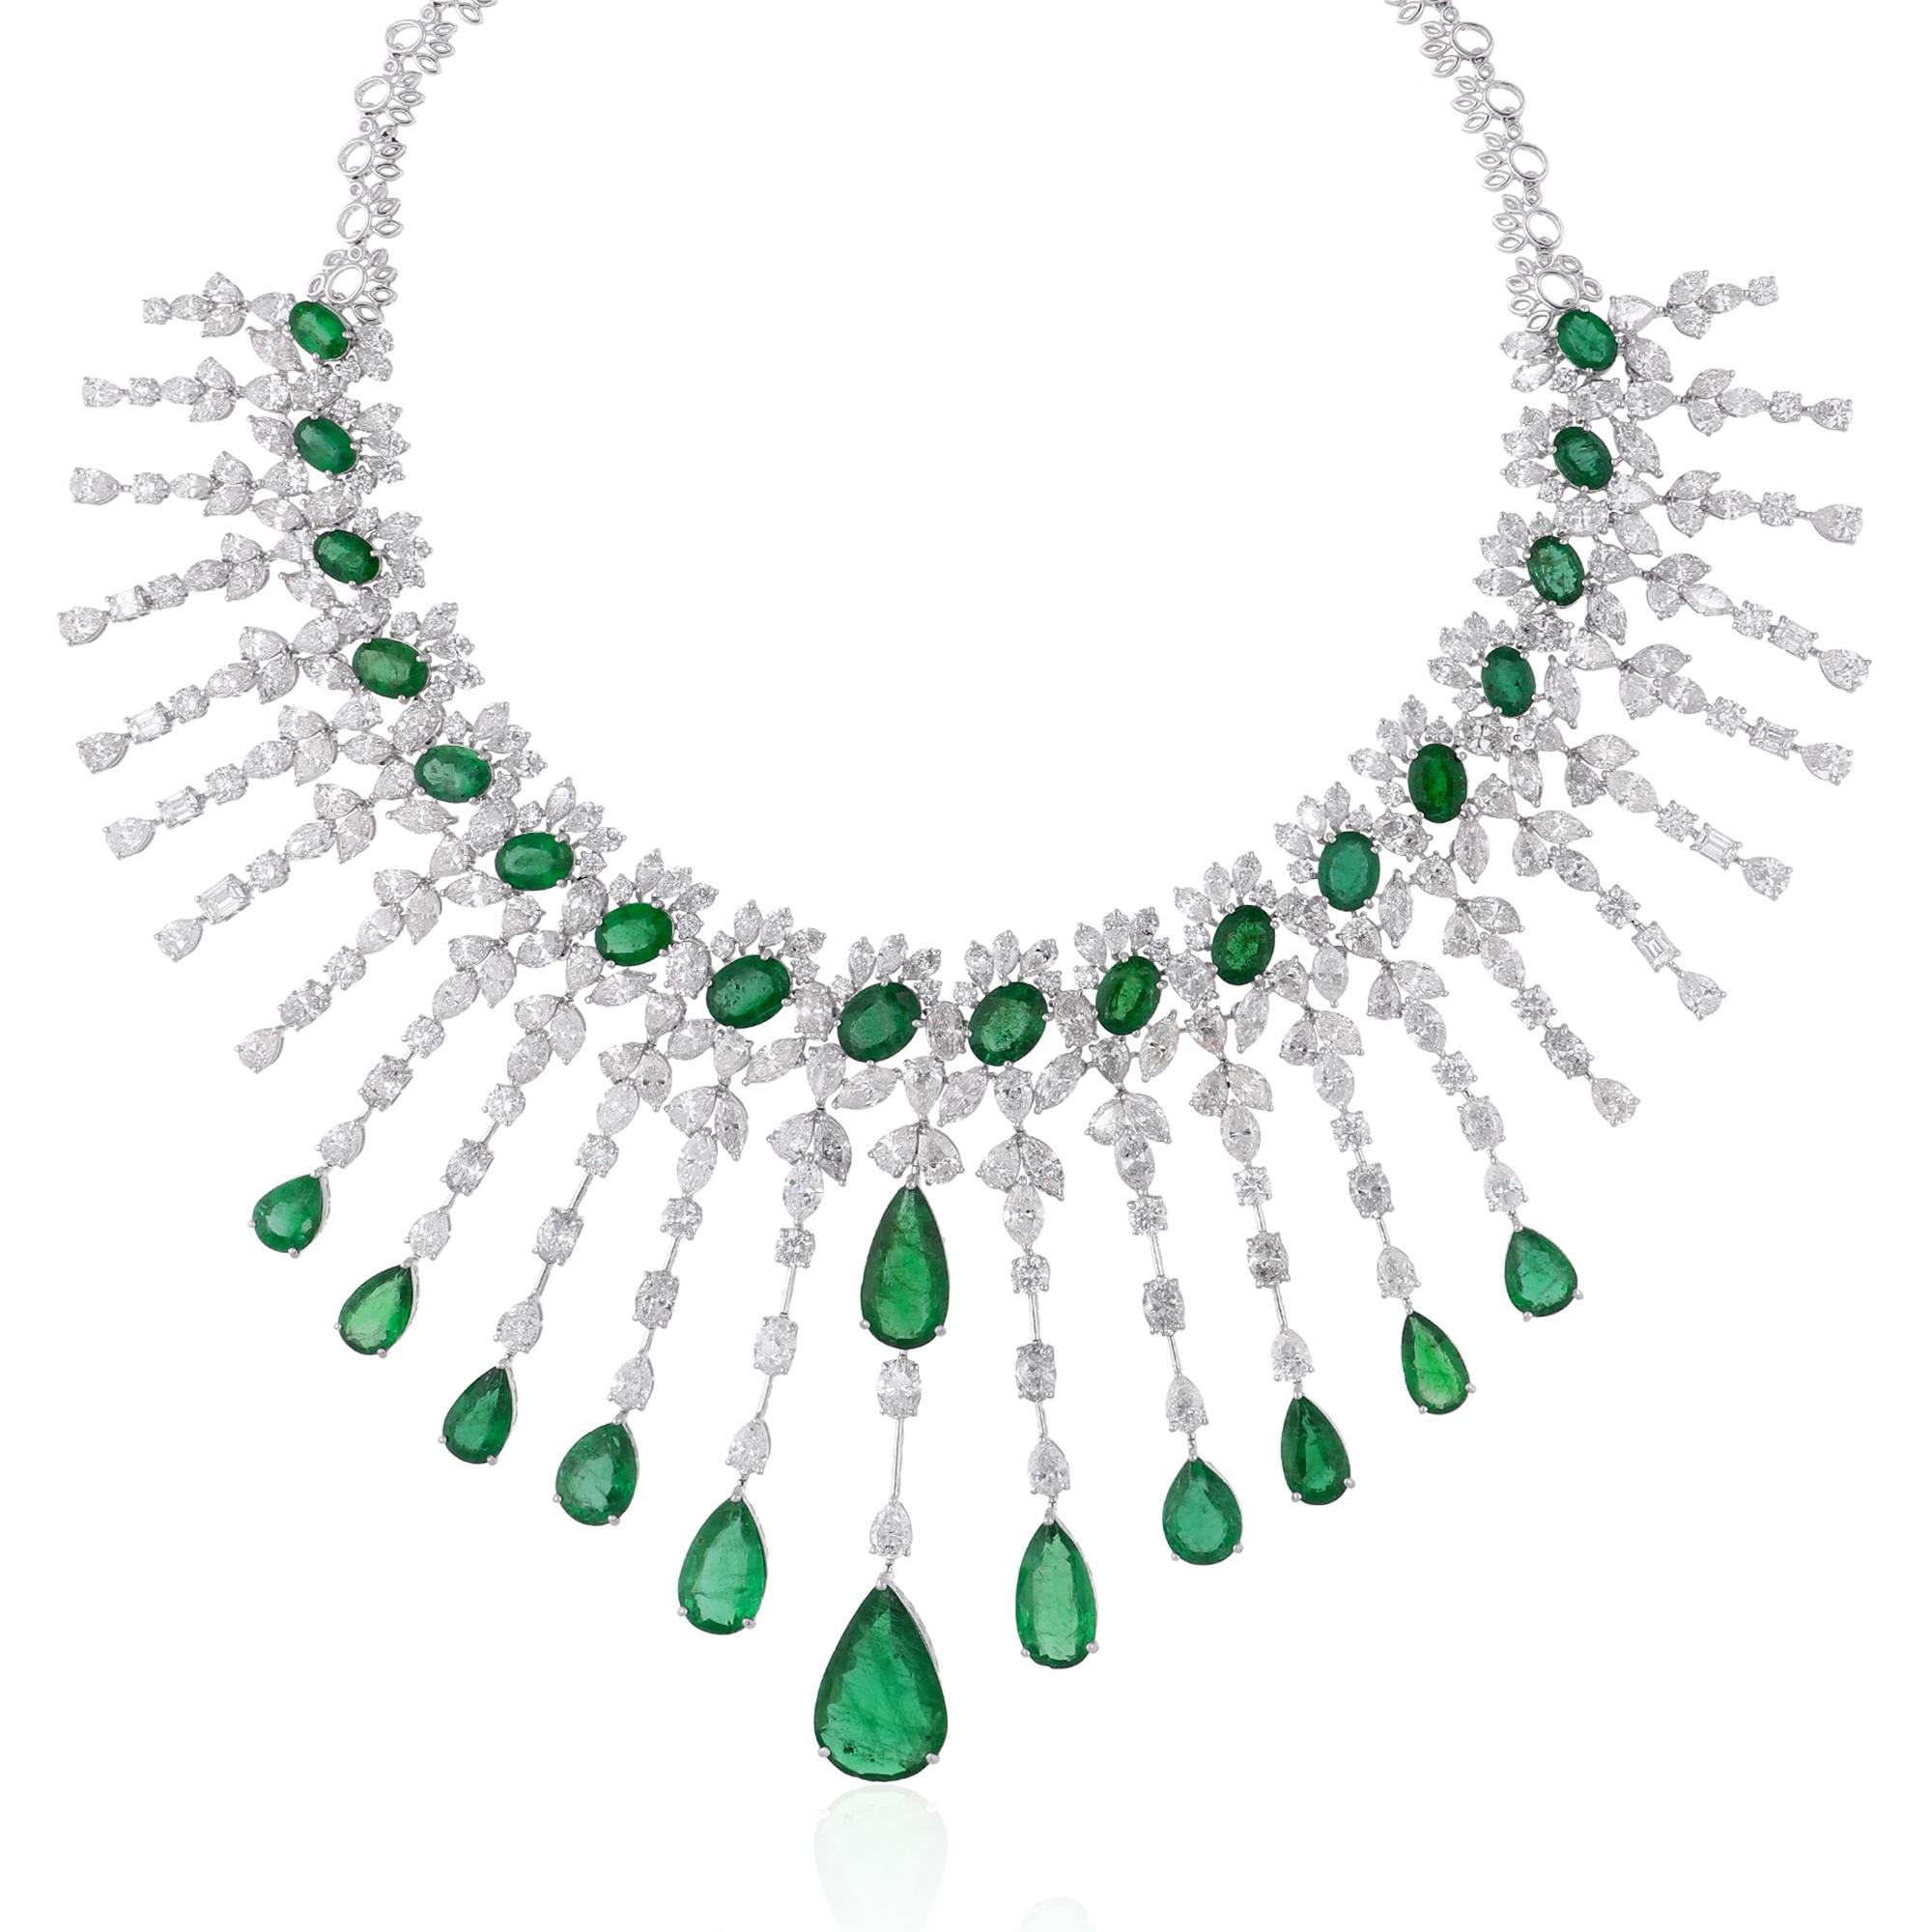 Crafted with meticulous attention to detail, this Zambian Pear Emerald Gemstone Choker Necklace is designed to be treasured for a lifetime. The radiant 14 karat white gold setting provides the perfect backdrop for the dazzling gemstones, ensuring